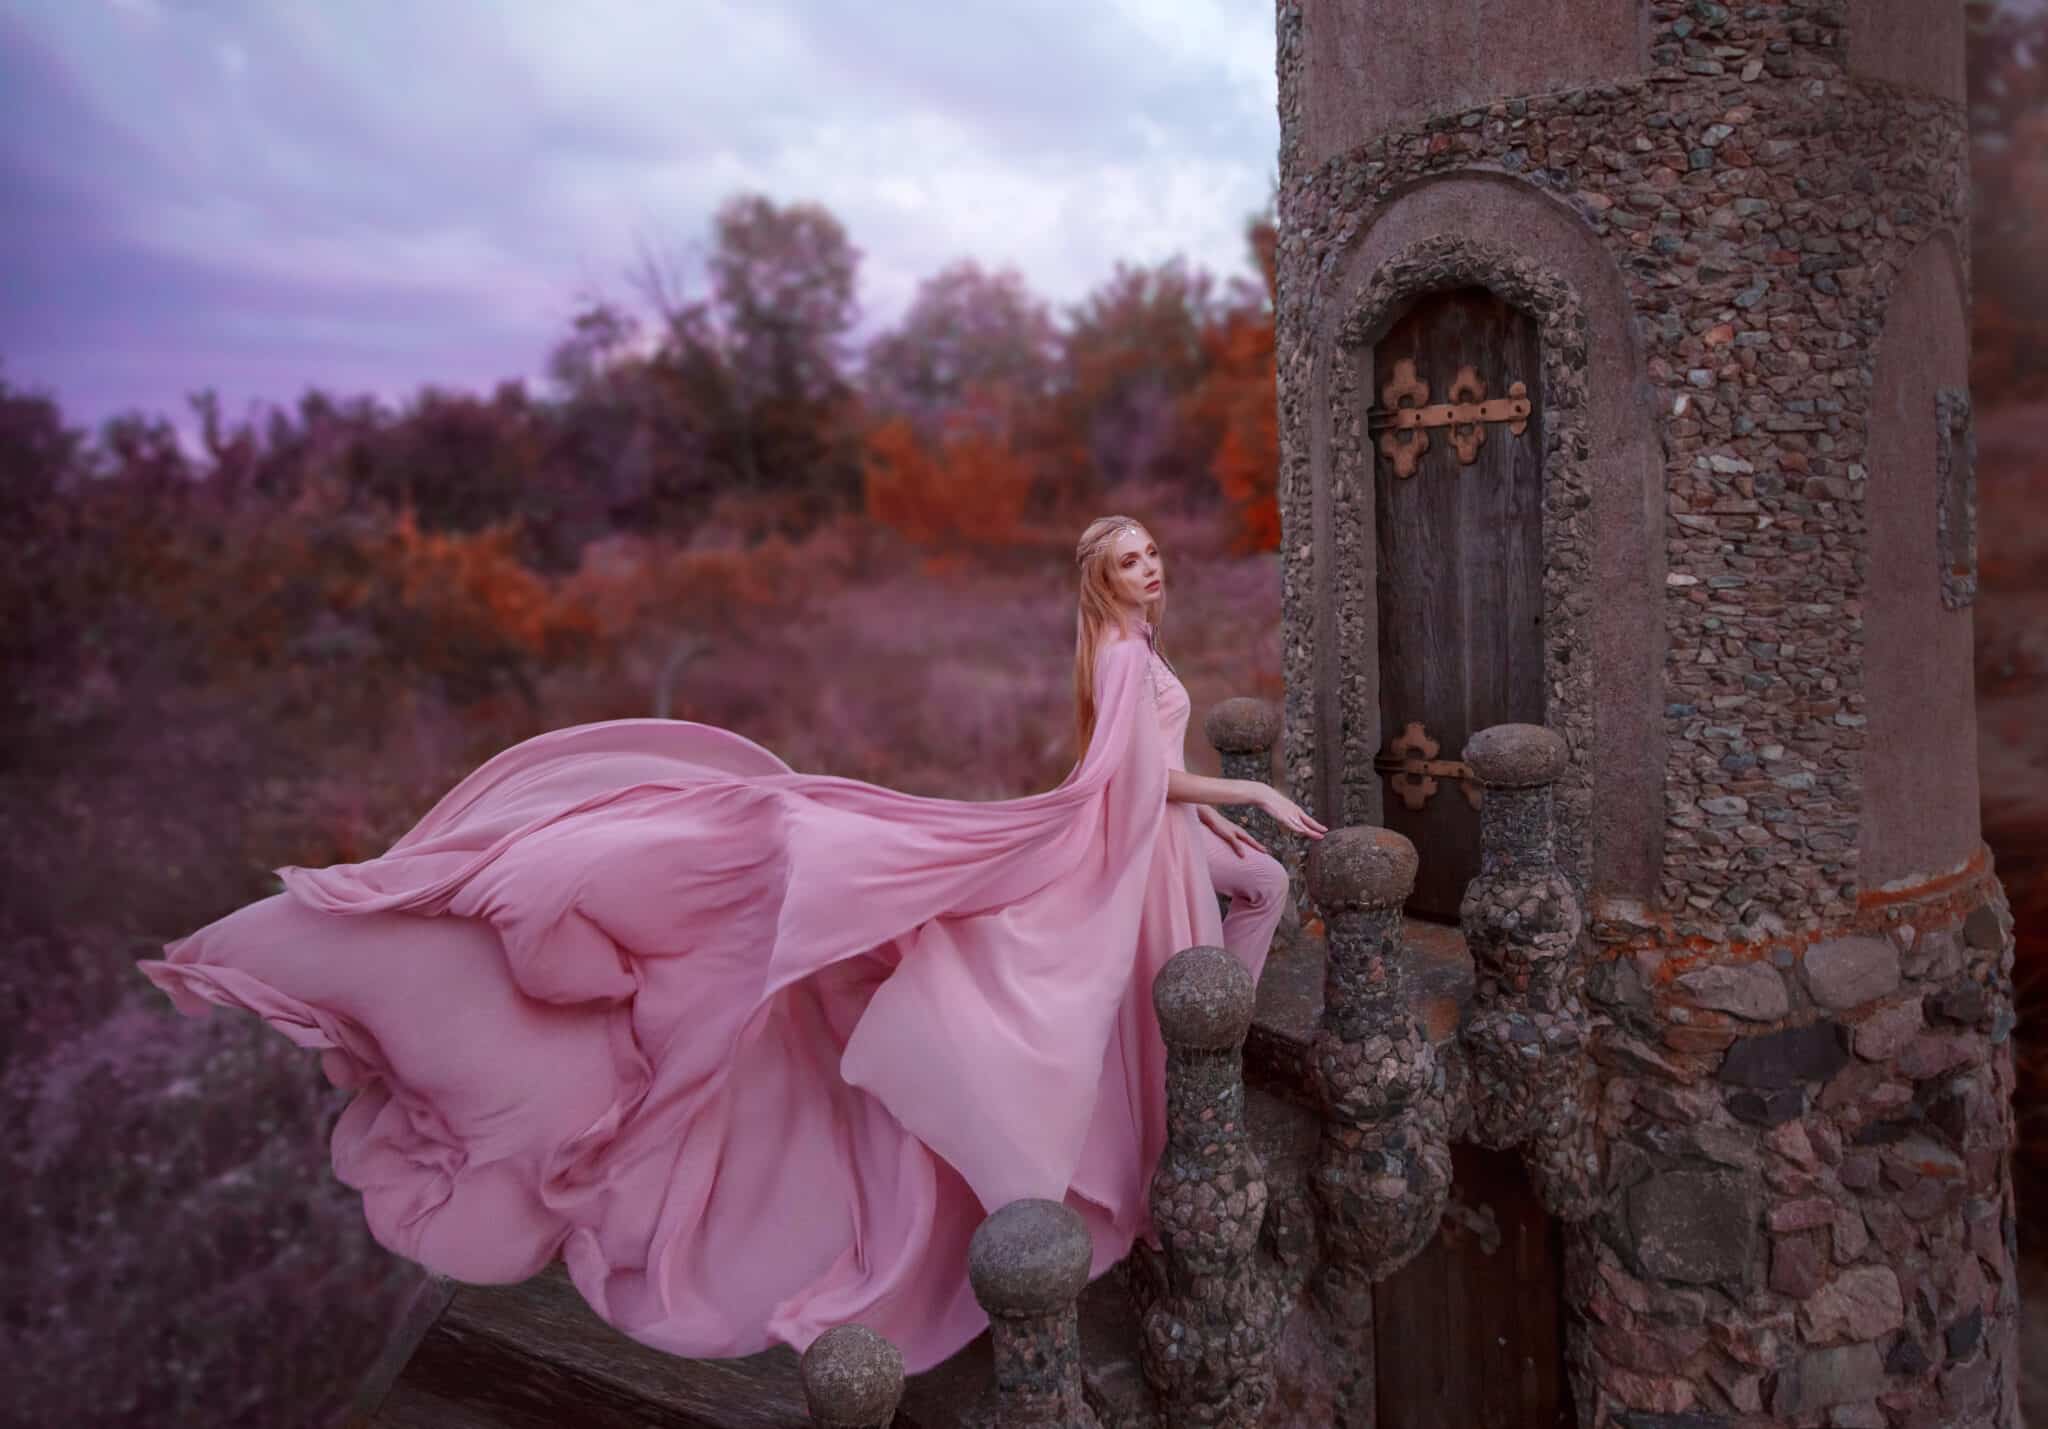 wonderful elegant girl elf with blond fair hair with tiara, wearing a luxurious long light pink fluttering dress standing on the castle staircase